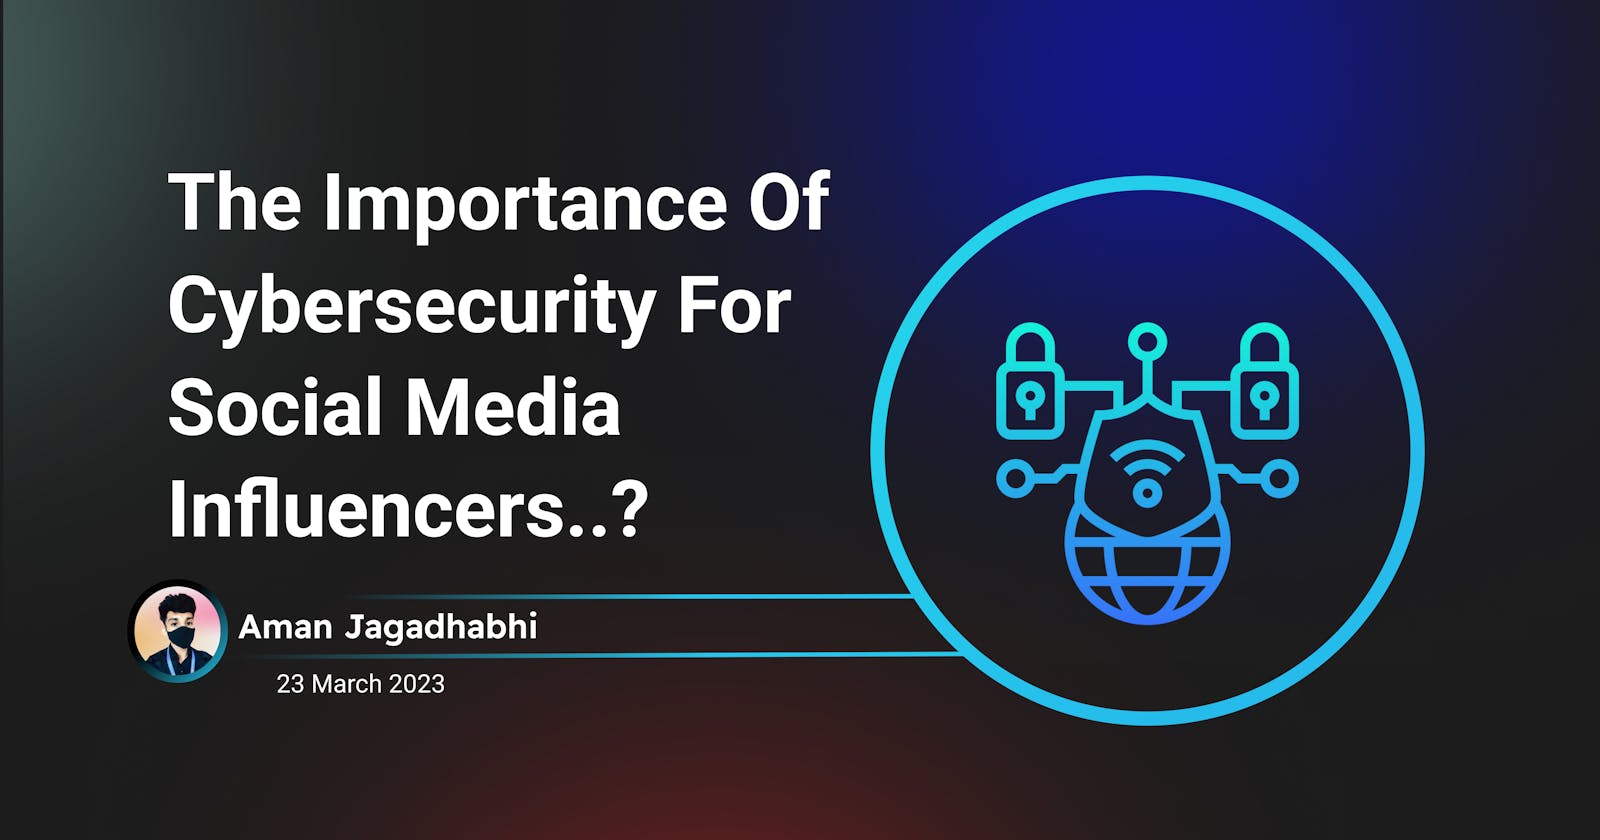 The importance of cybersecurity for social media influencers..??